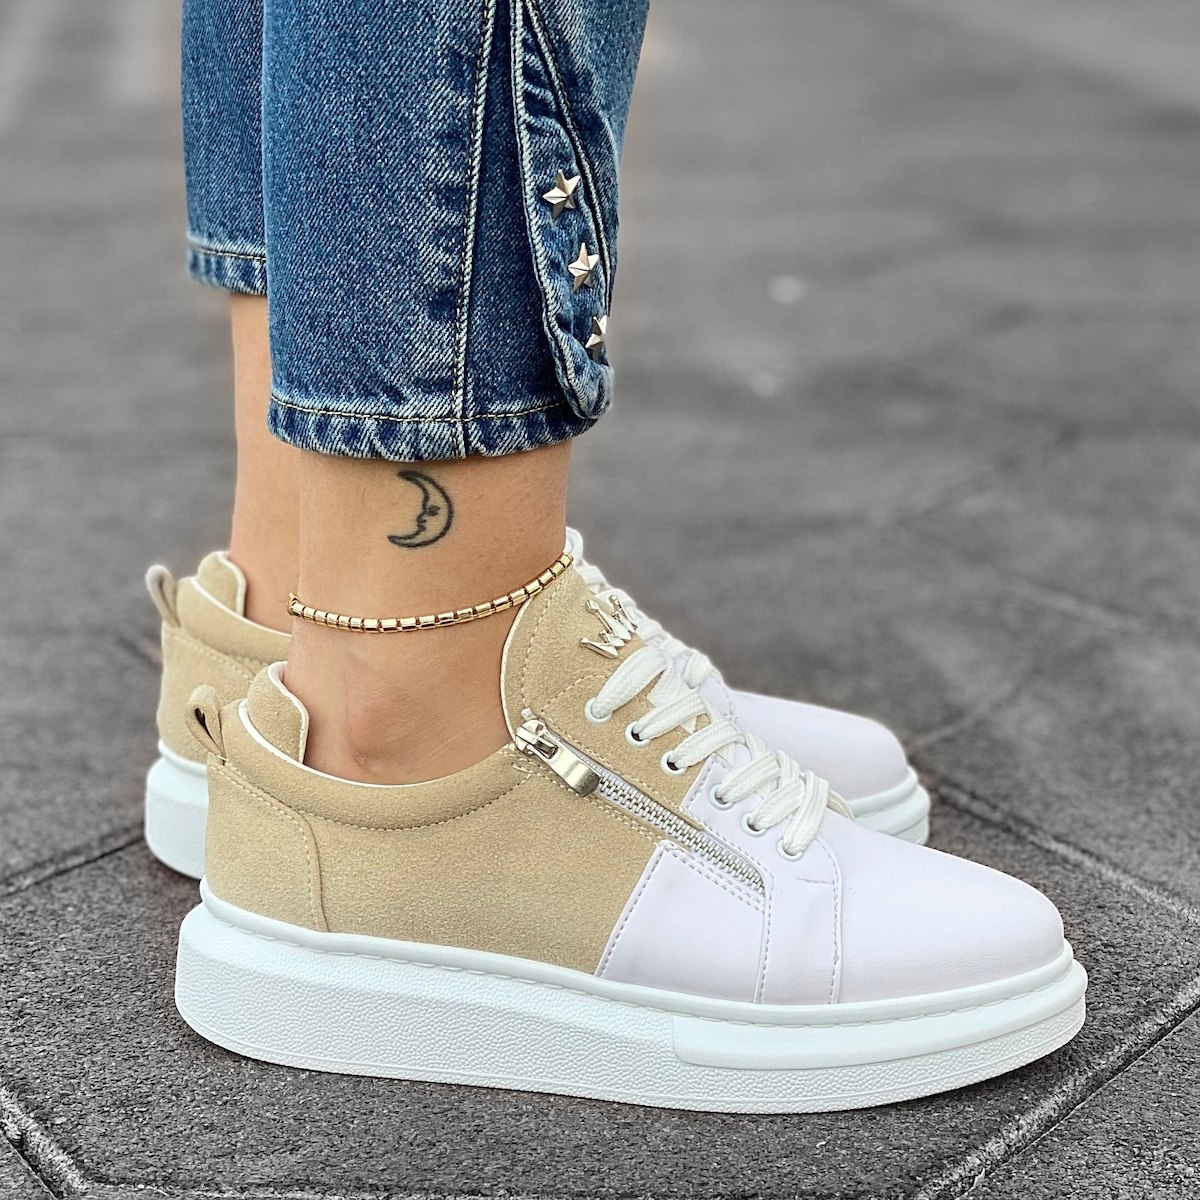 Women's Chunky Sneakers with Zippers in Cream and White | Martin Valen